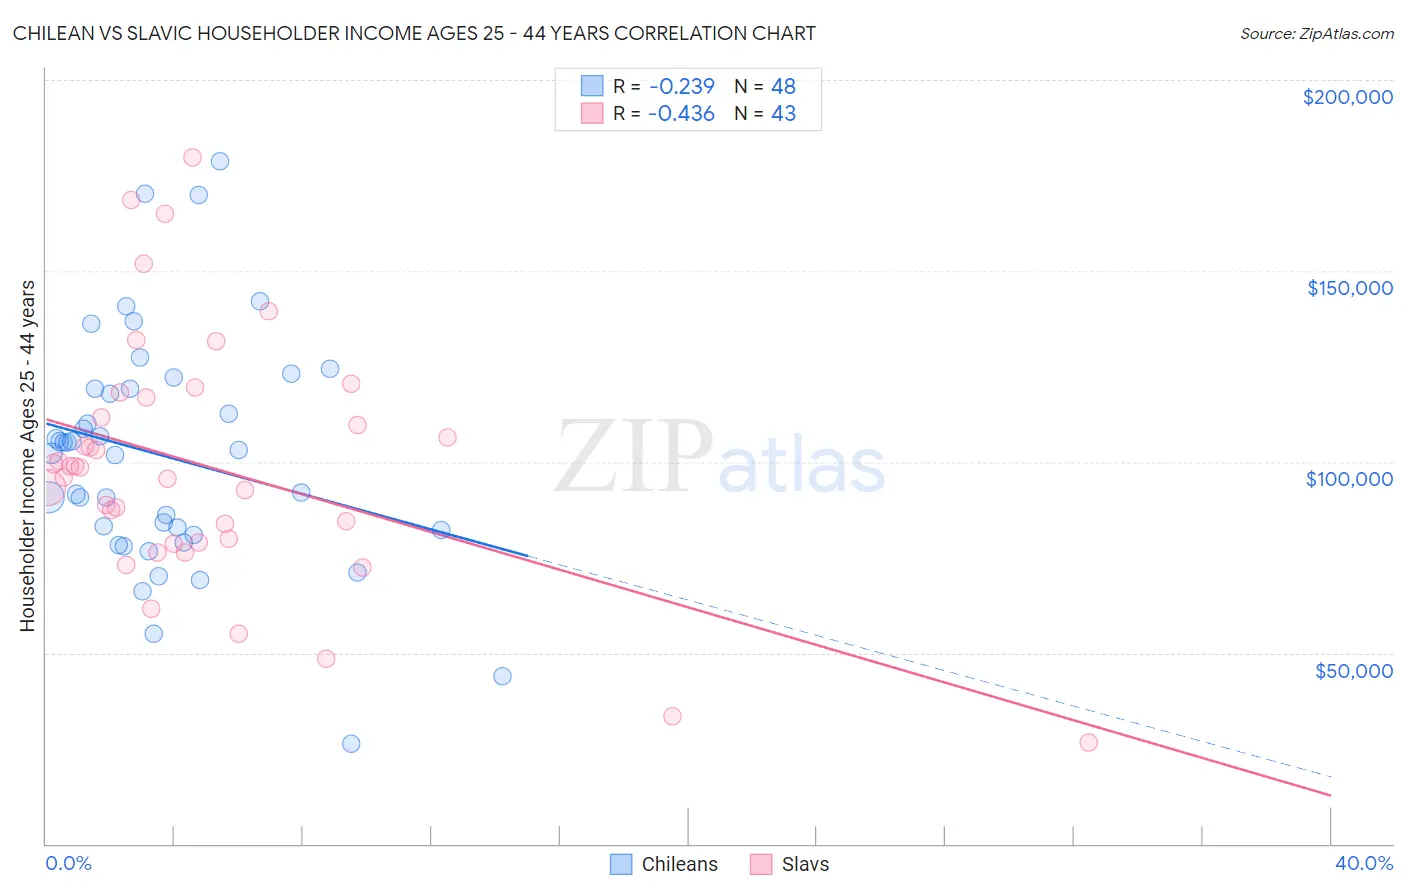 Chilean vs Slavic Householder Income Ages 25 - 44 years